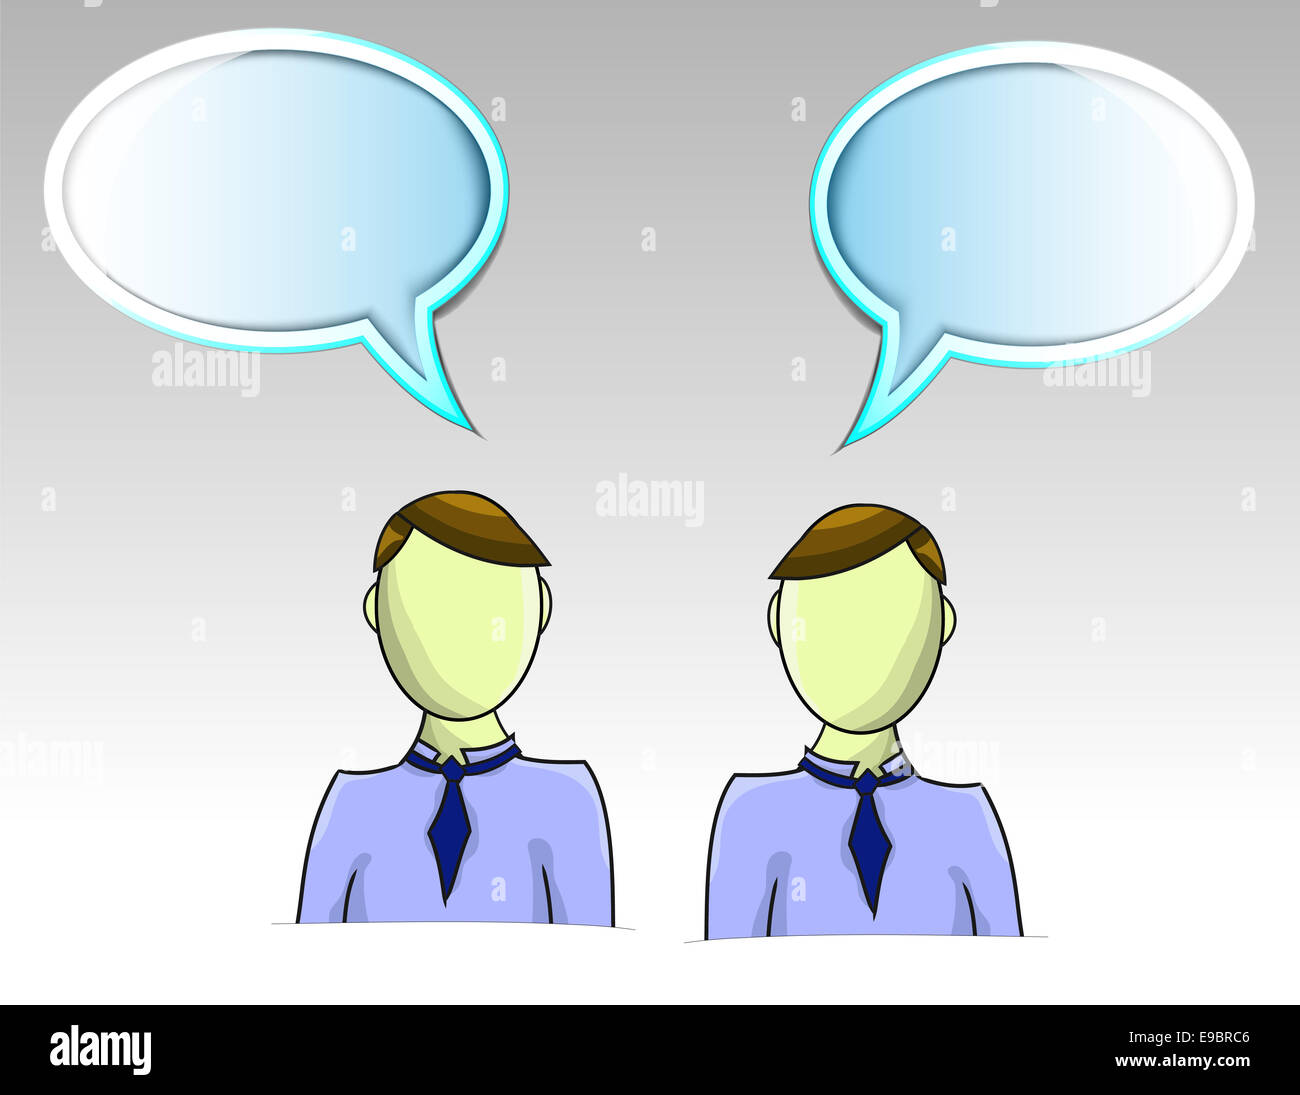 Illustration of two business men with text balloons Stock Photo